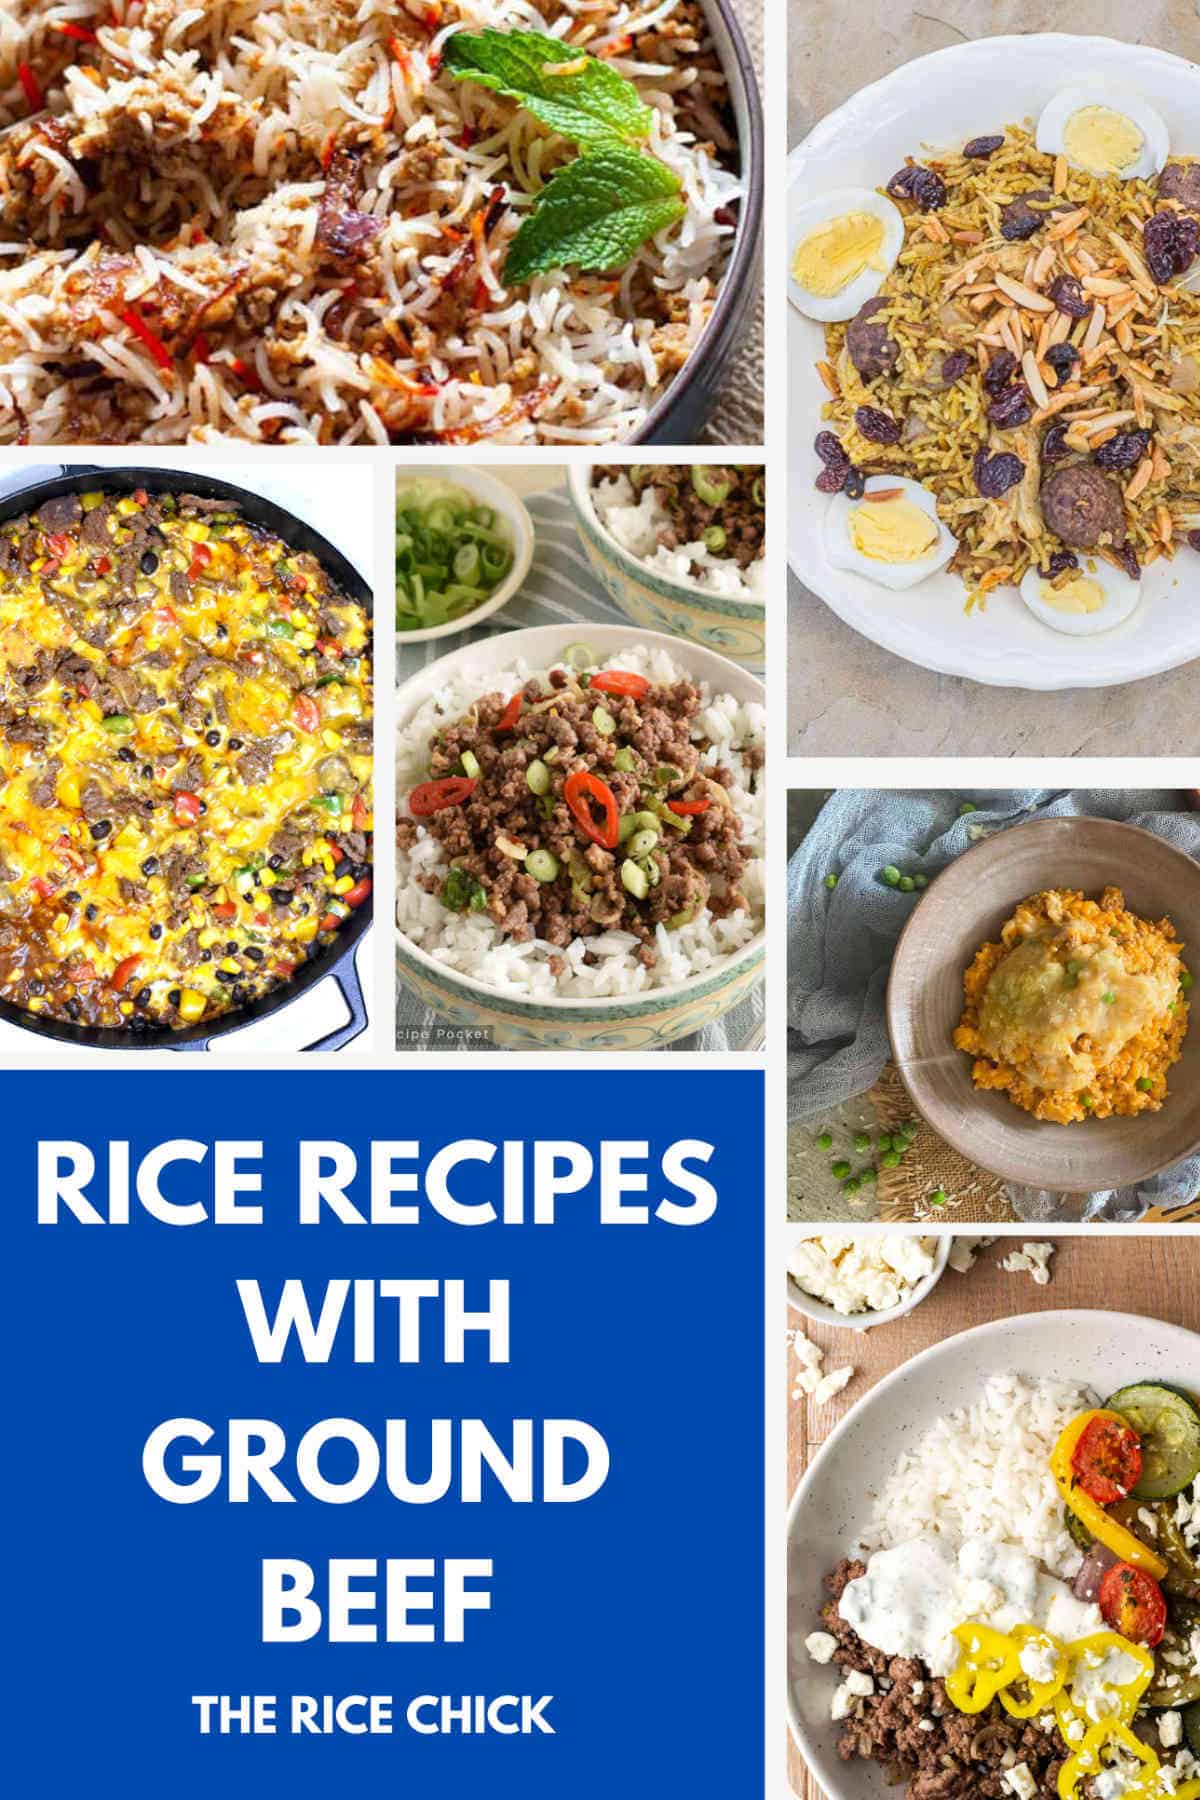 A collection of images for rice recipes with ground beef.